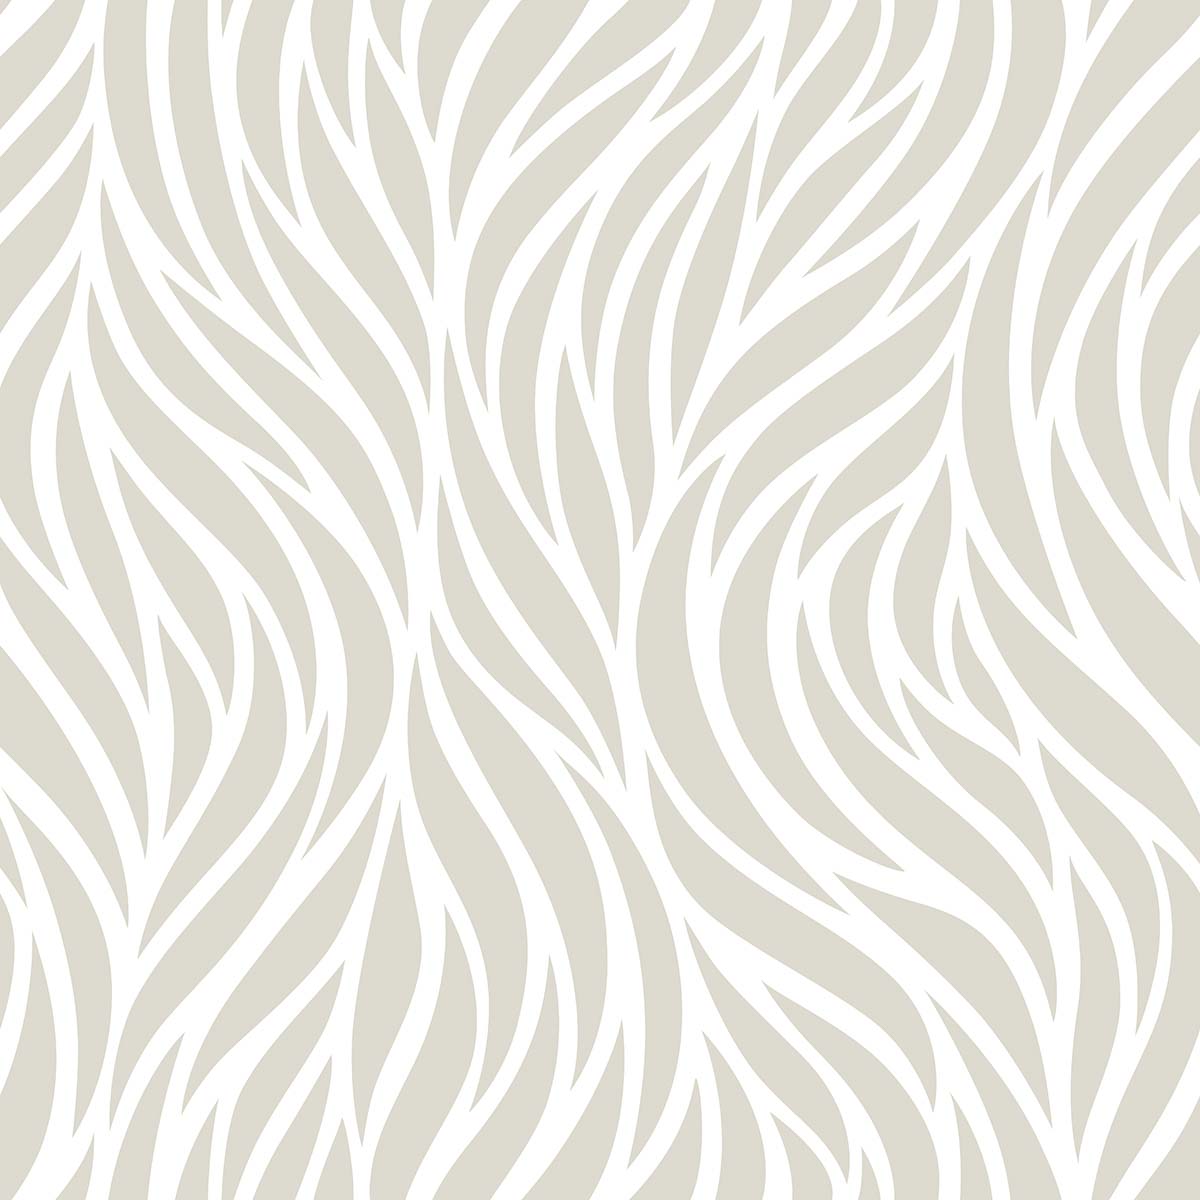 A white and gray pattern